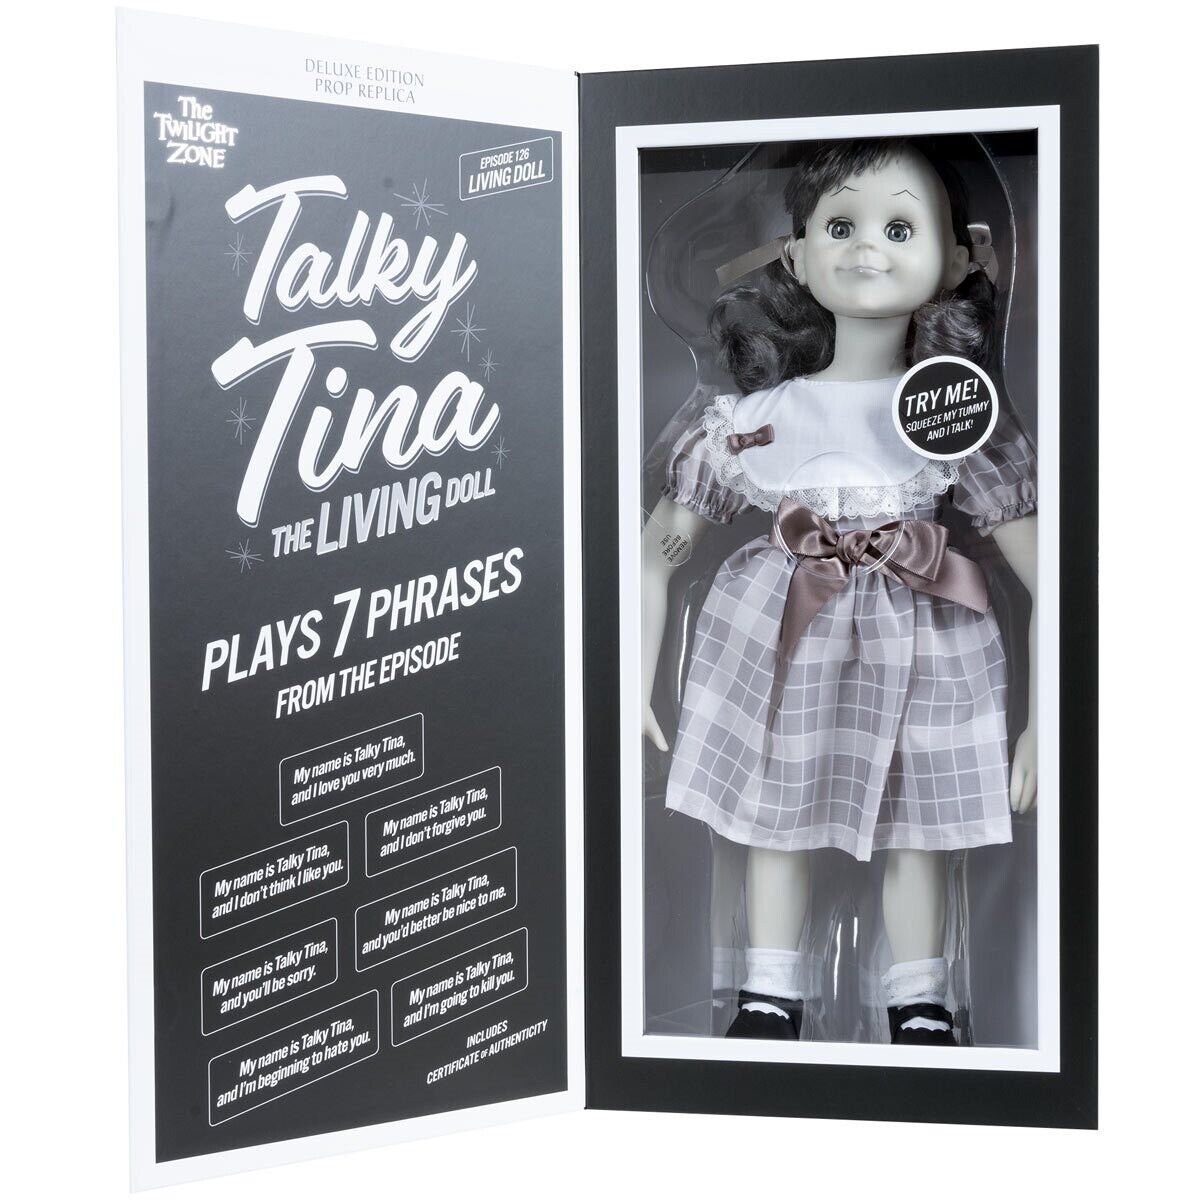 The Twilight Zone Talky Tina 18-Inch Prop Replica Doll Limited Edition 514/ 1004